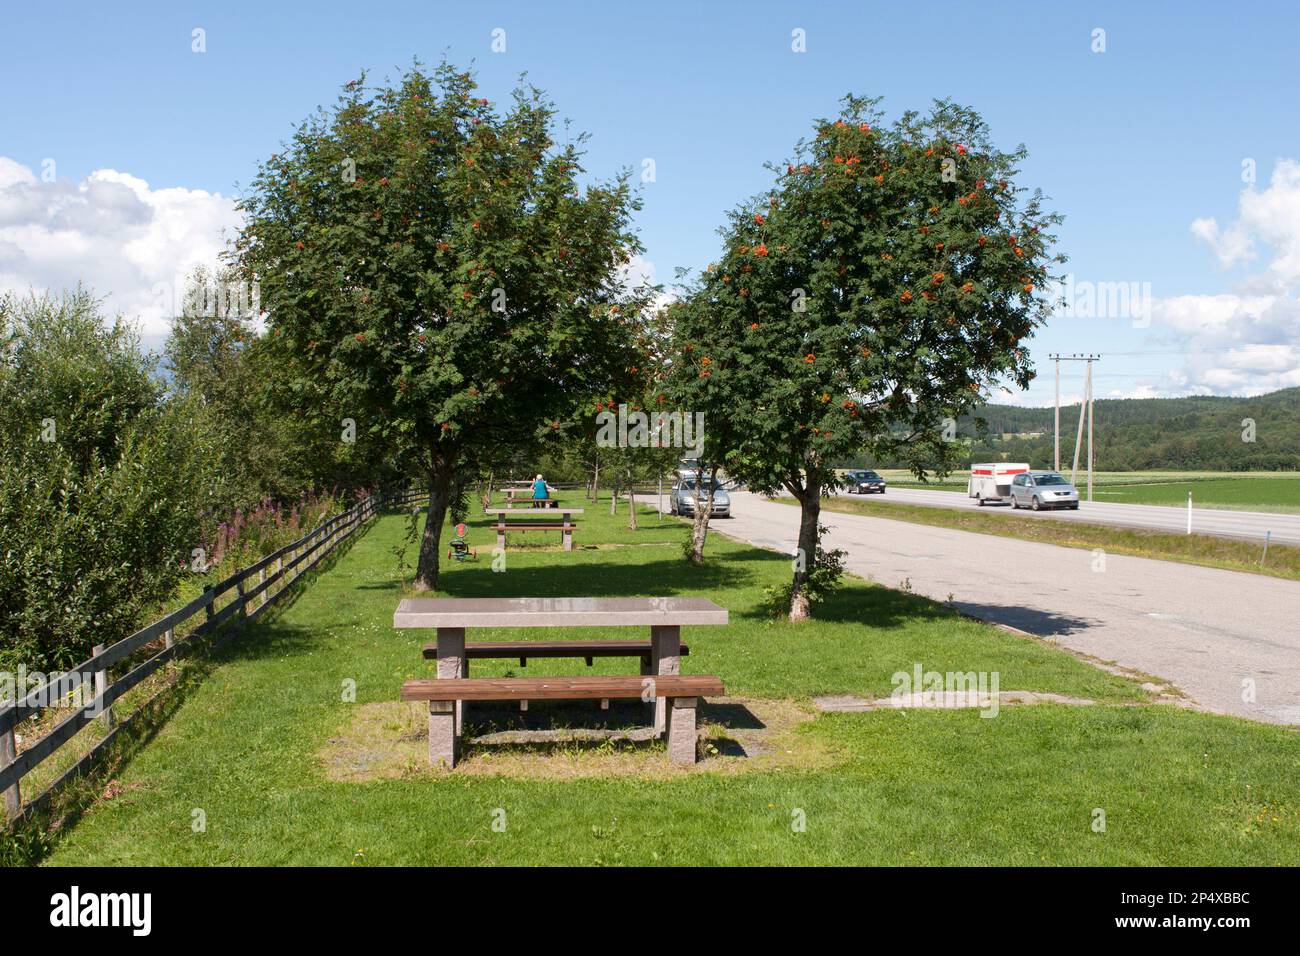 GLOMMA, NORWAY ON JULY 27, 2011. Rest area next to a highway. Unidentified people in the service area. Editorial use. Stock Photo